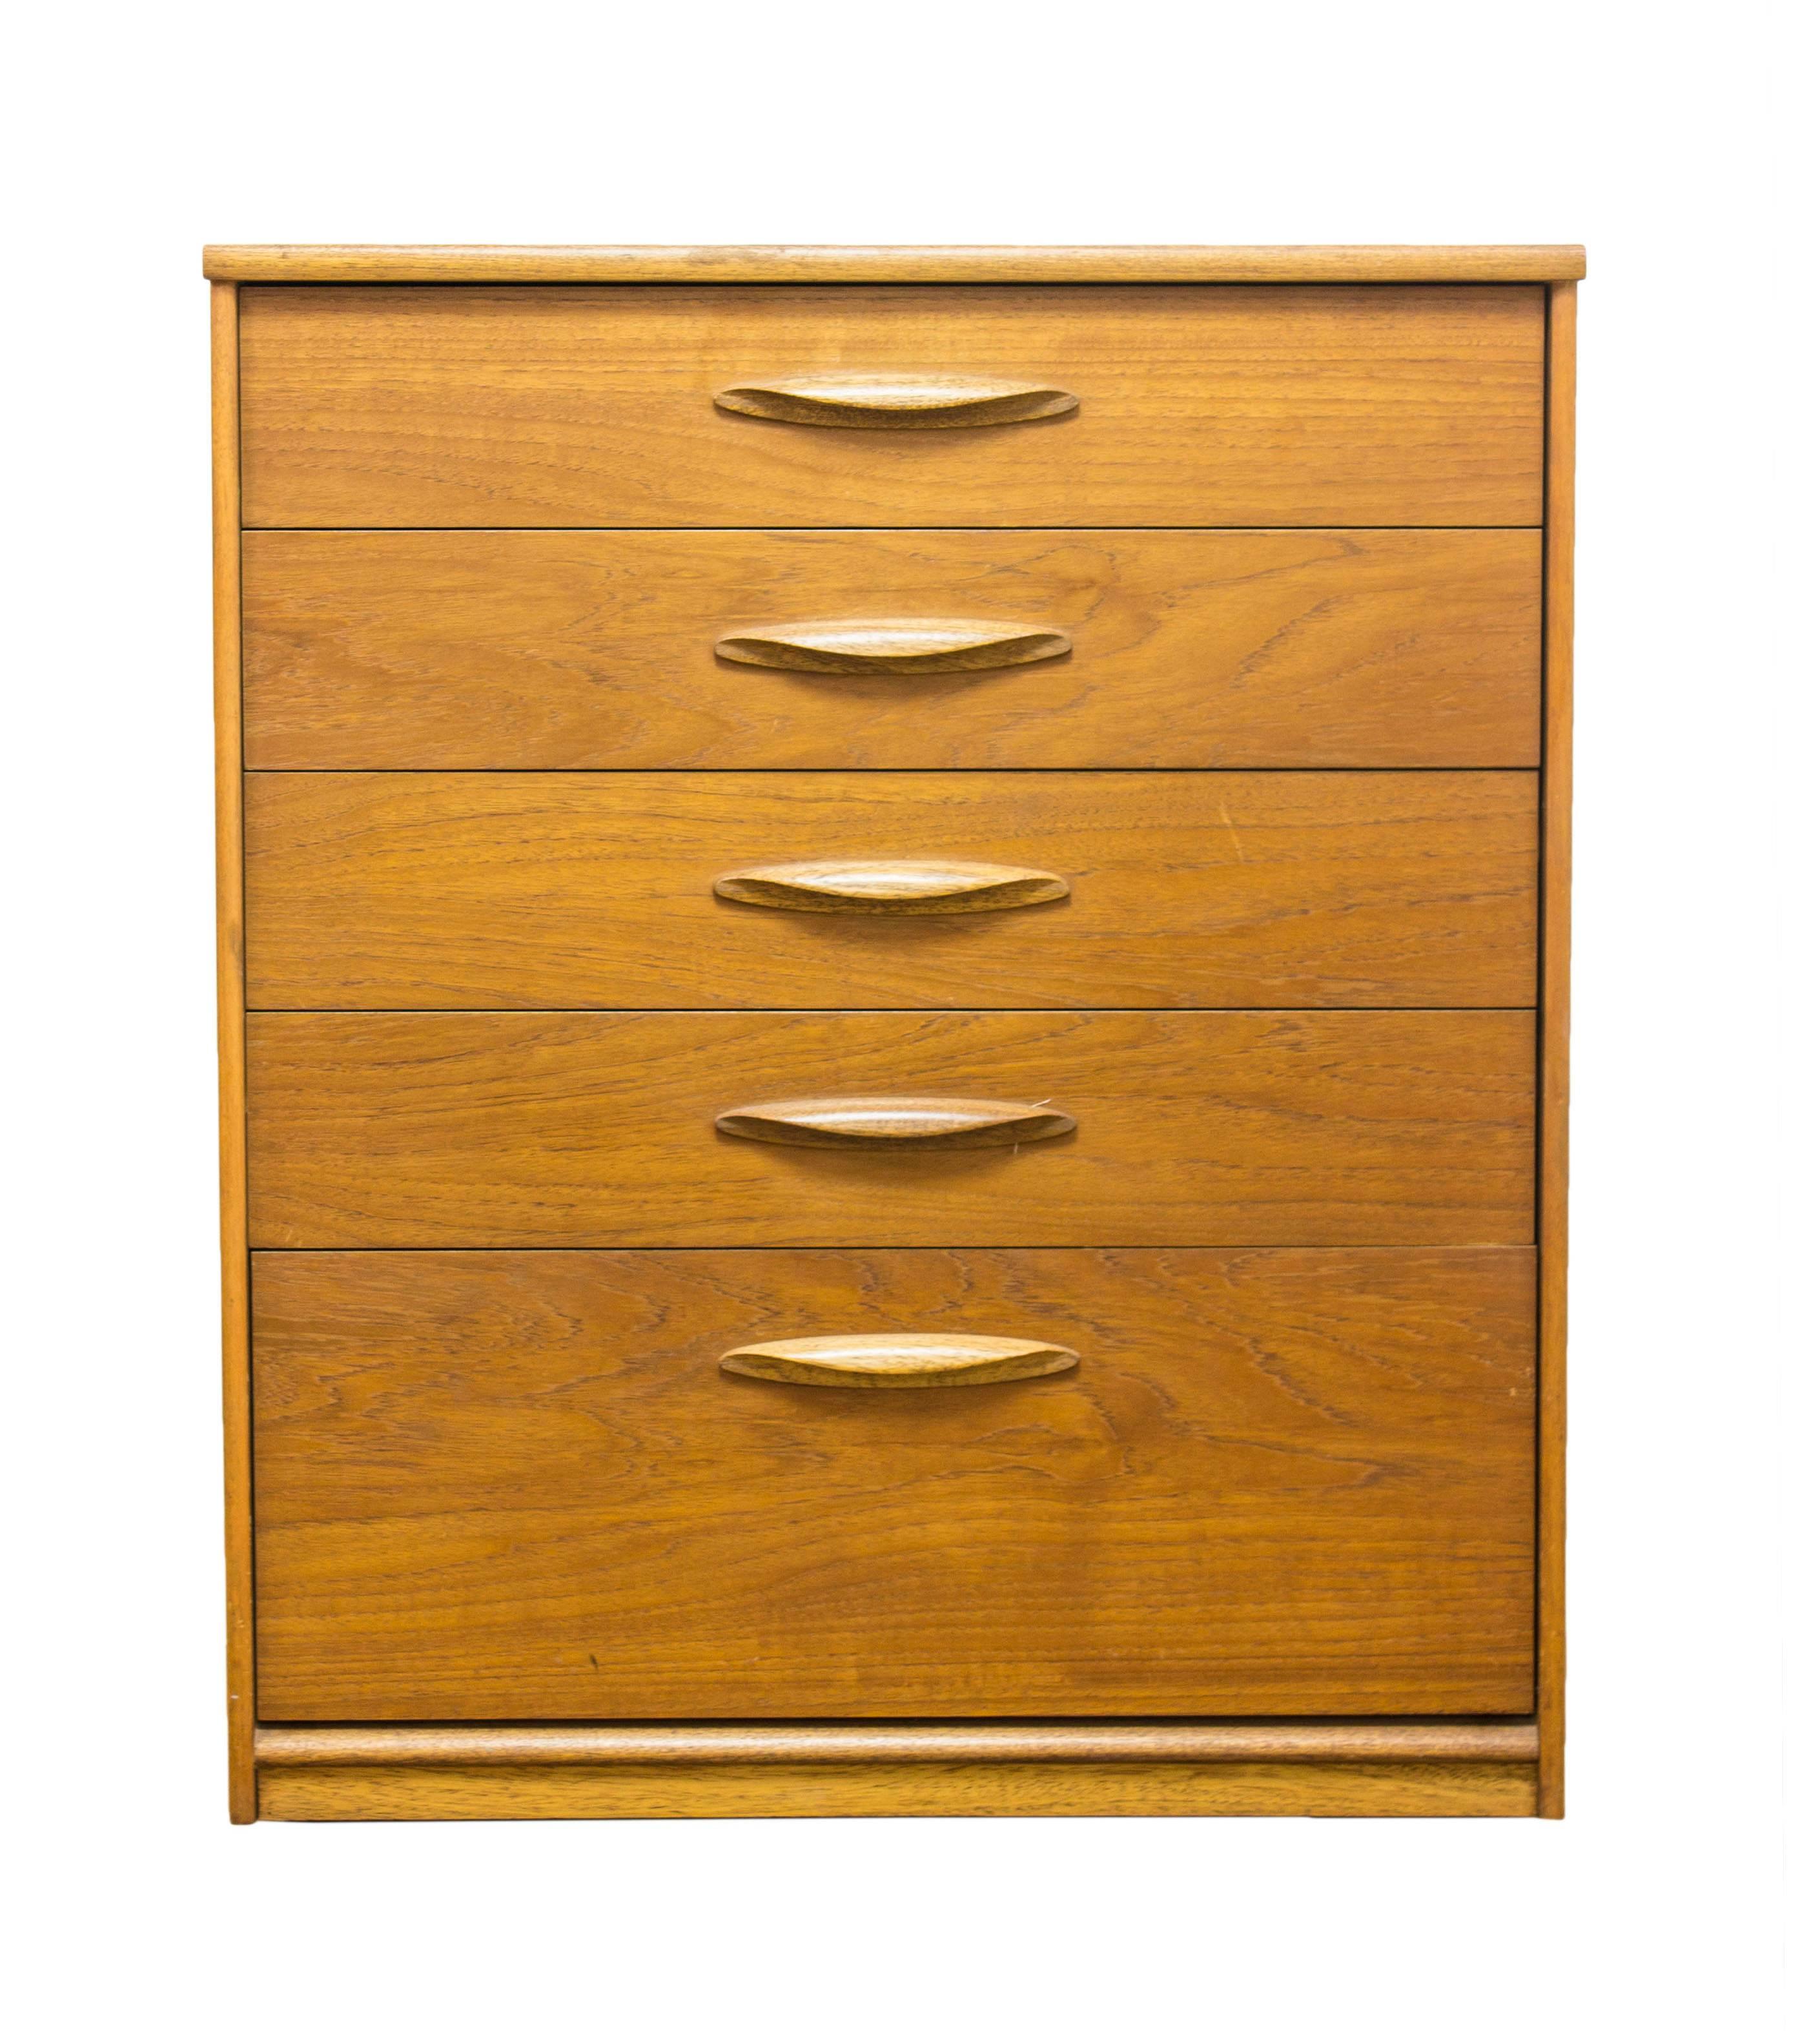 Austinsuite of London soon emerged as a leader in quality Mid-Century furniture produced in the UK and standing up against fierce competition from both home and abroad taking on the giants of G Plan and Ercol.

With an eye firmly on design,